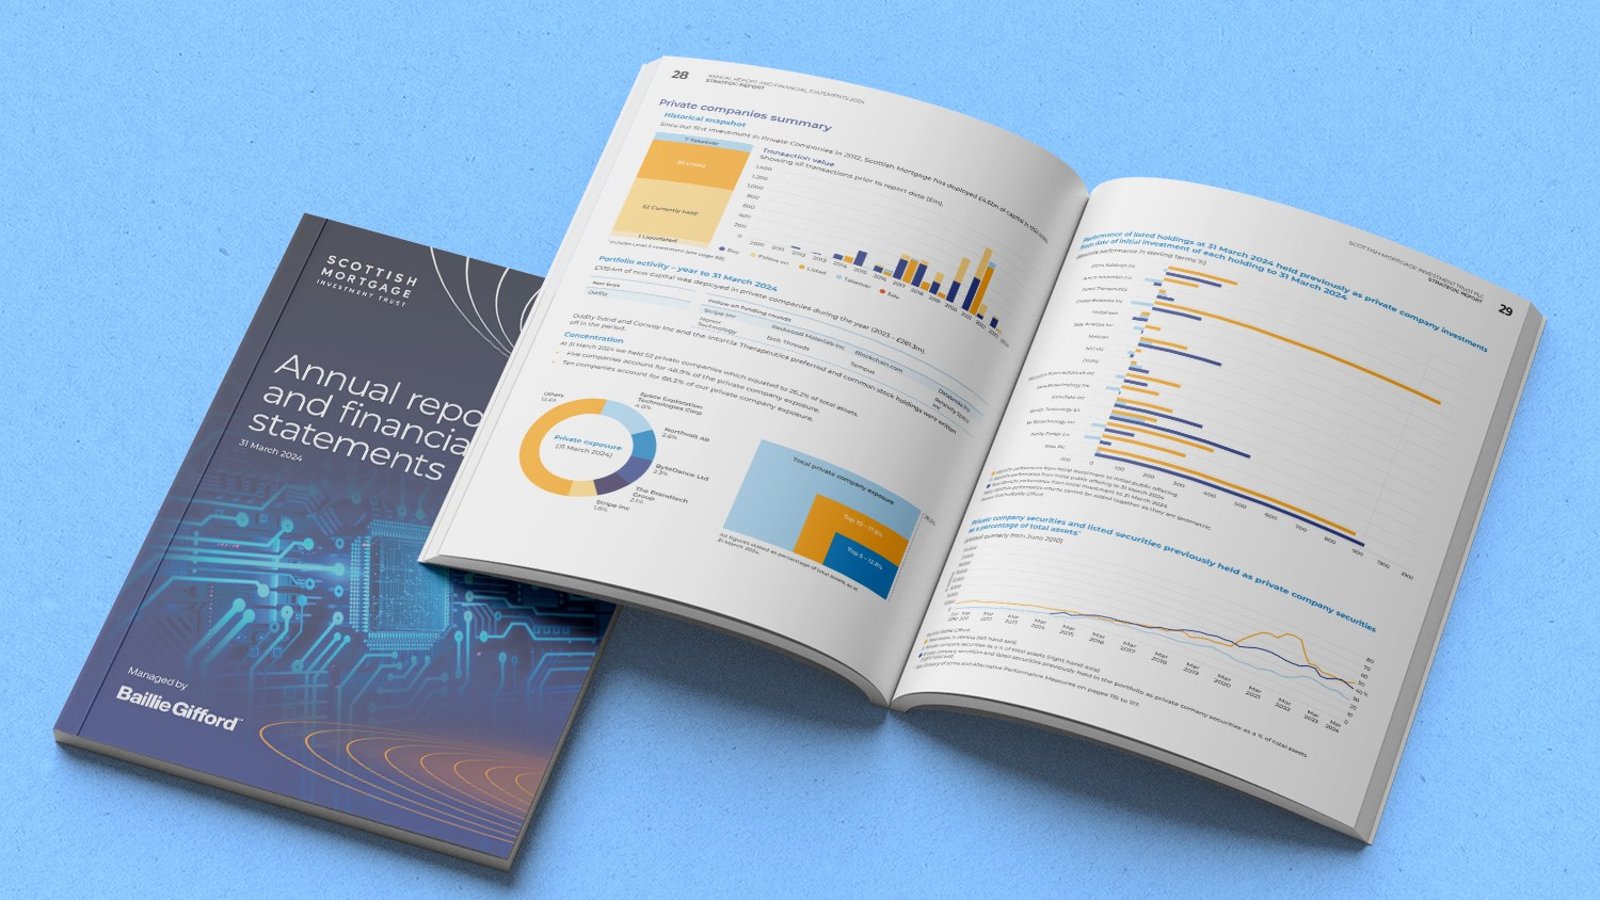 Two copies of The Scottish Mortgage annual report, one open on a page including charts, and one closed, showing the front cover. Both are placed on a light blue background.